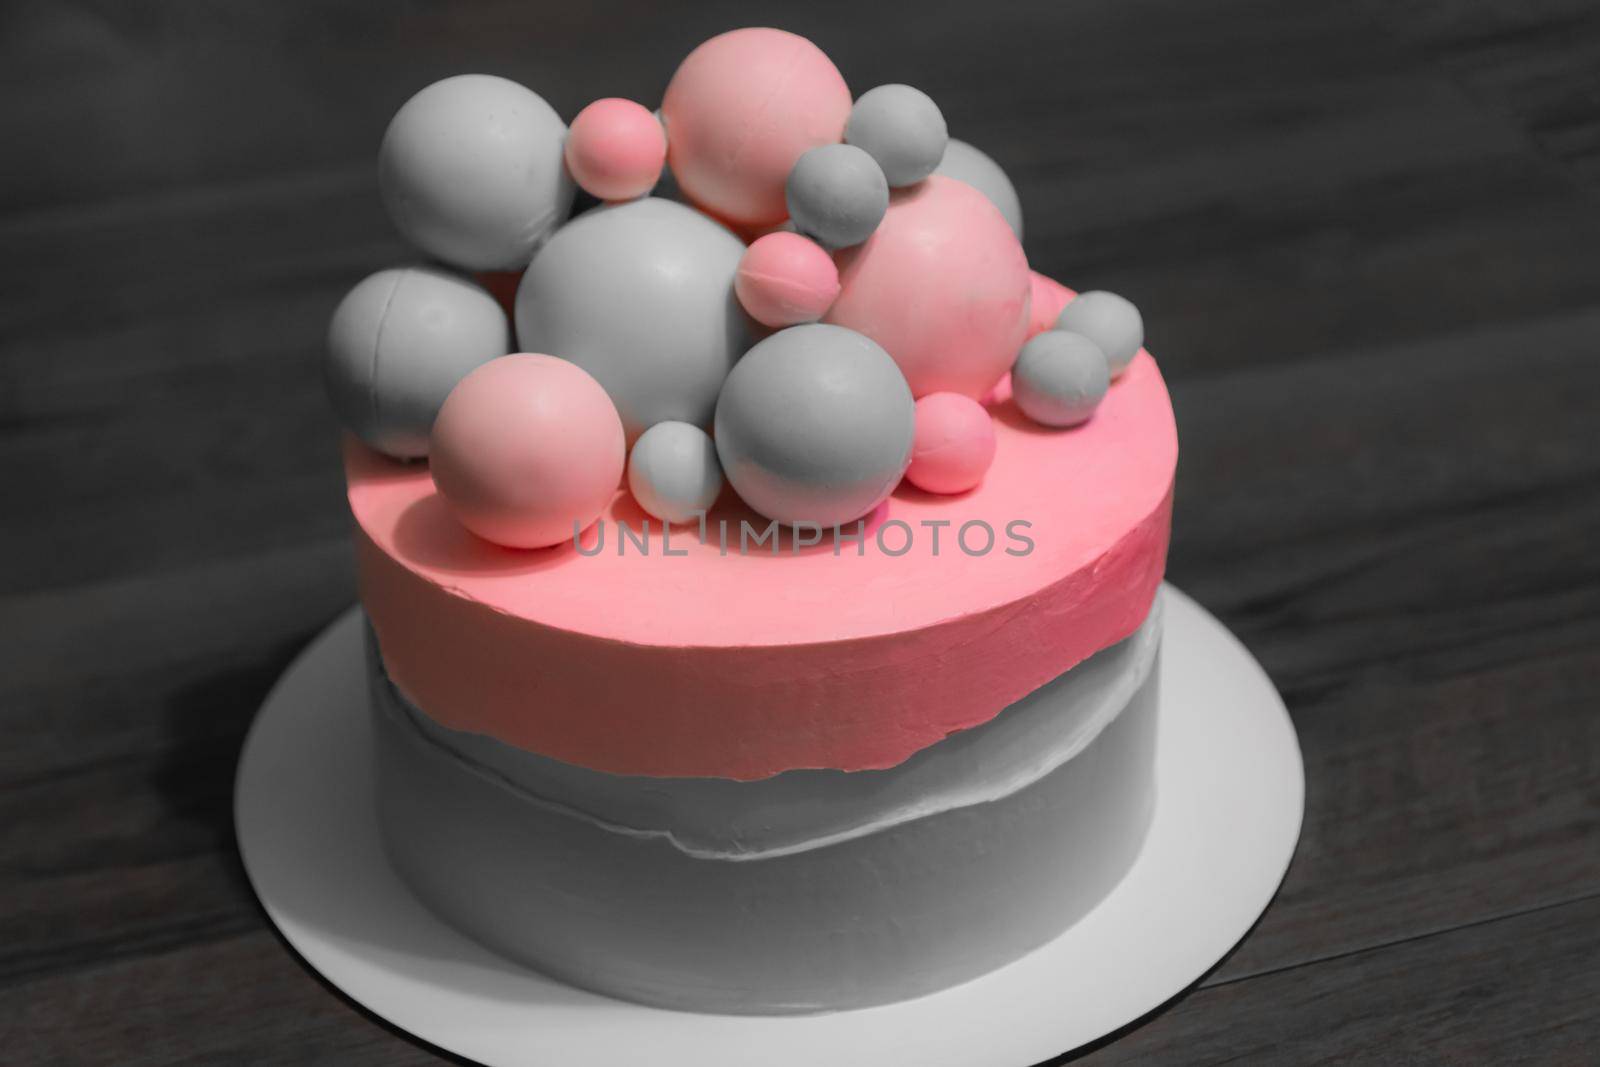 Wedding cake with pink elements made from pastry mastic on a gray background. Sugar balls beautiful decor for decorating cakes. For a menu or a confectionery catalog